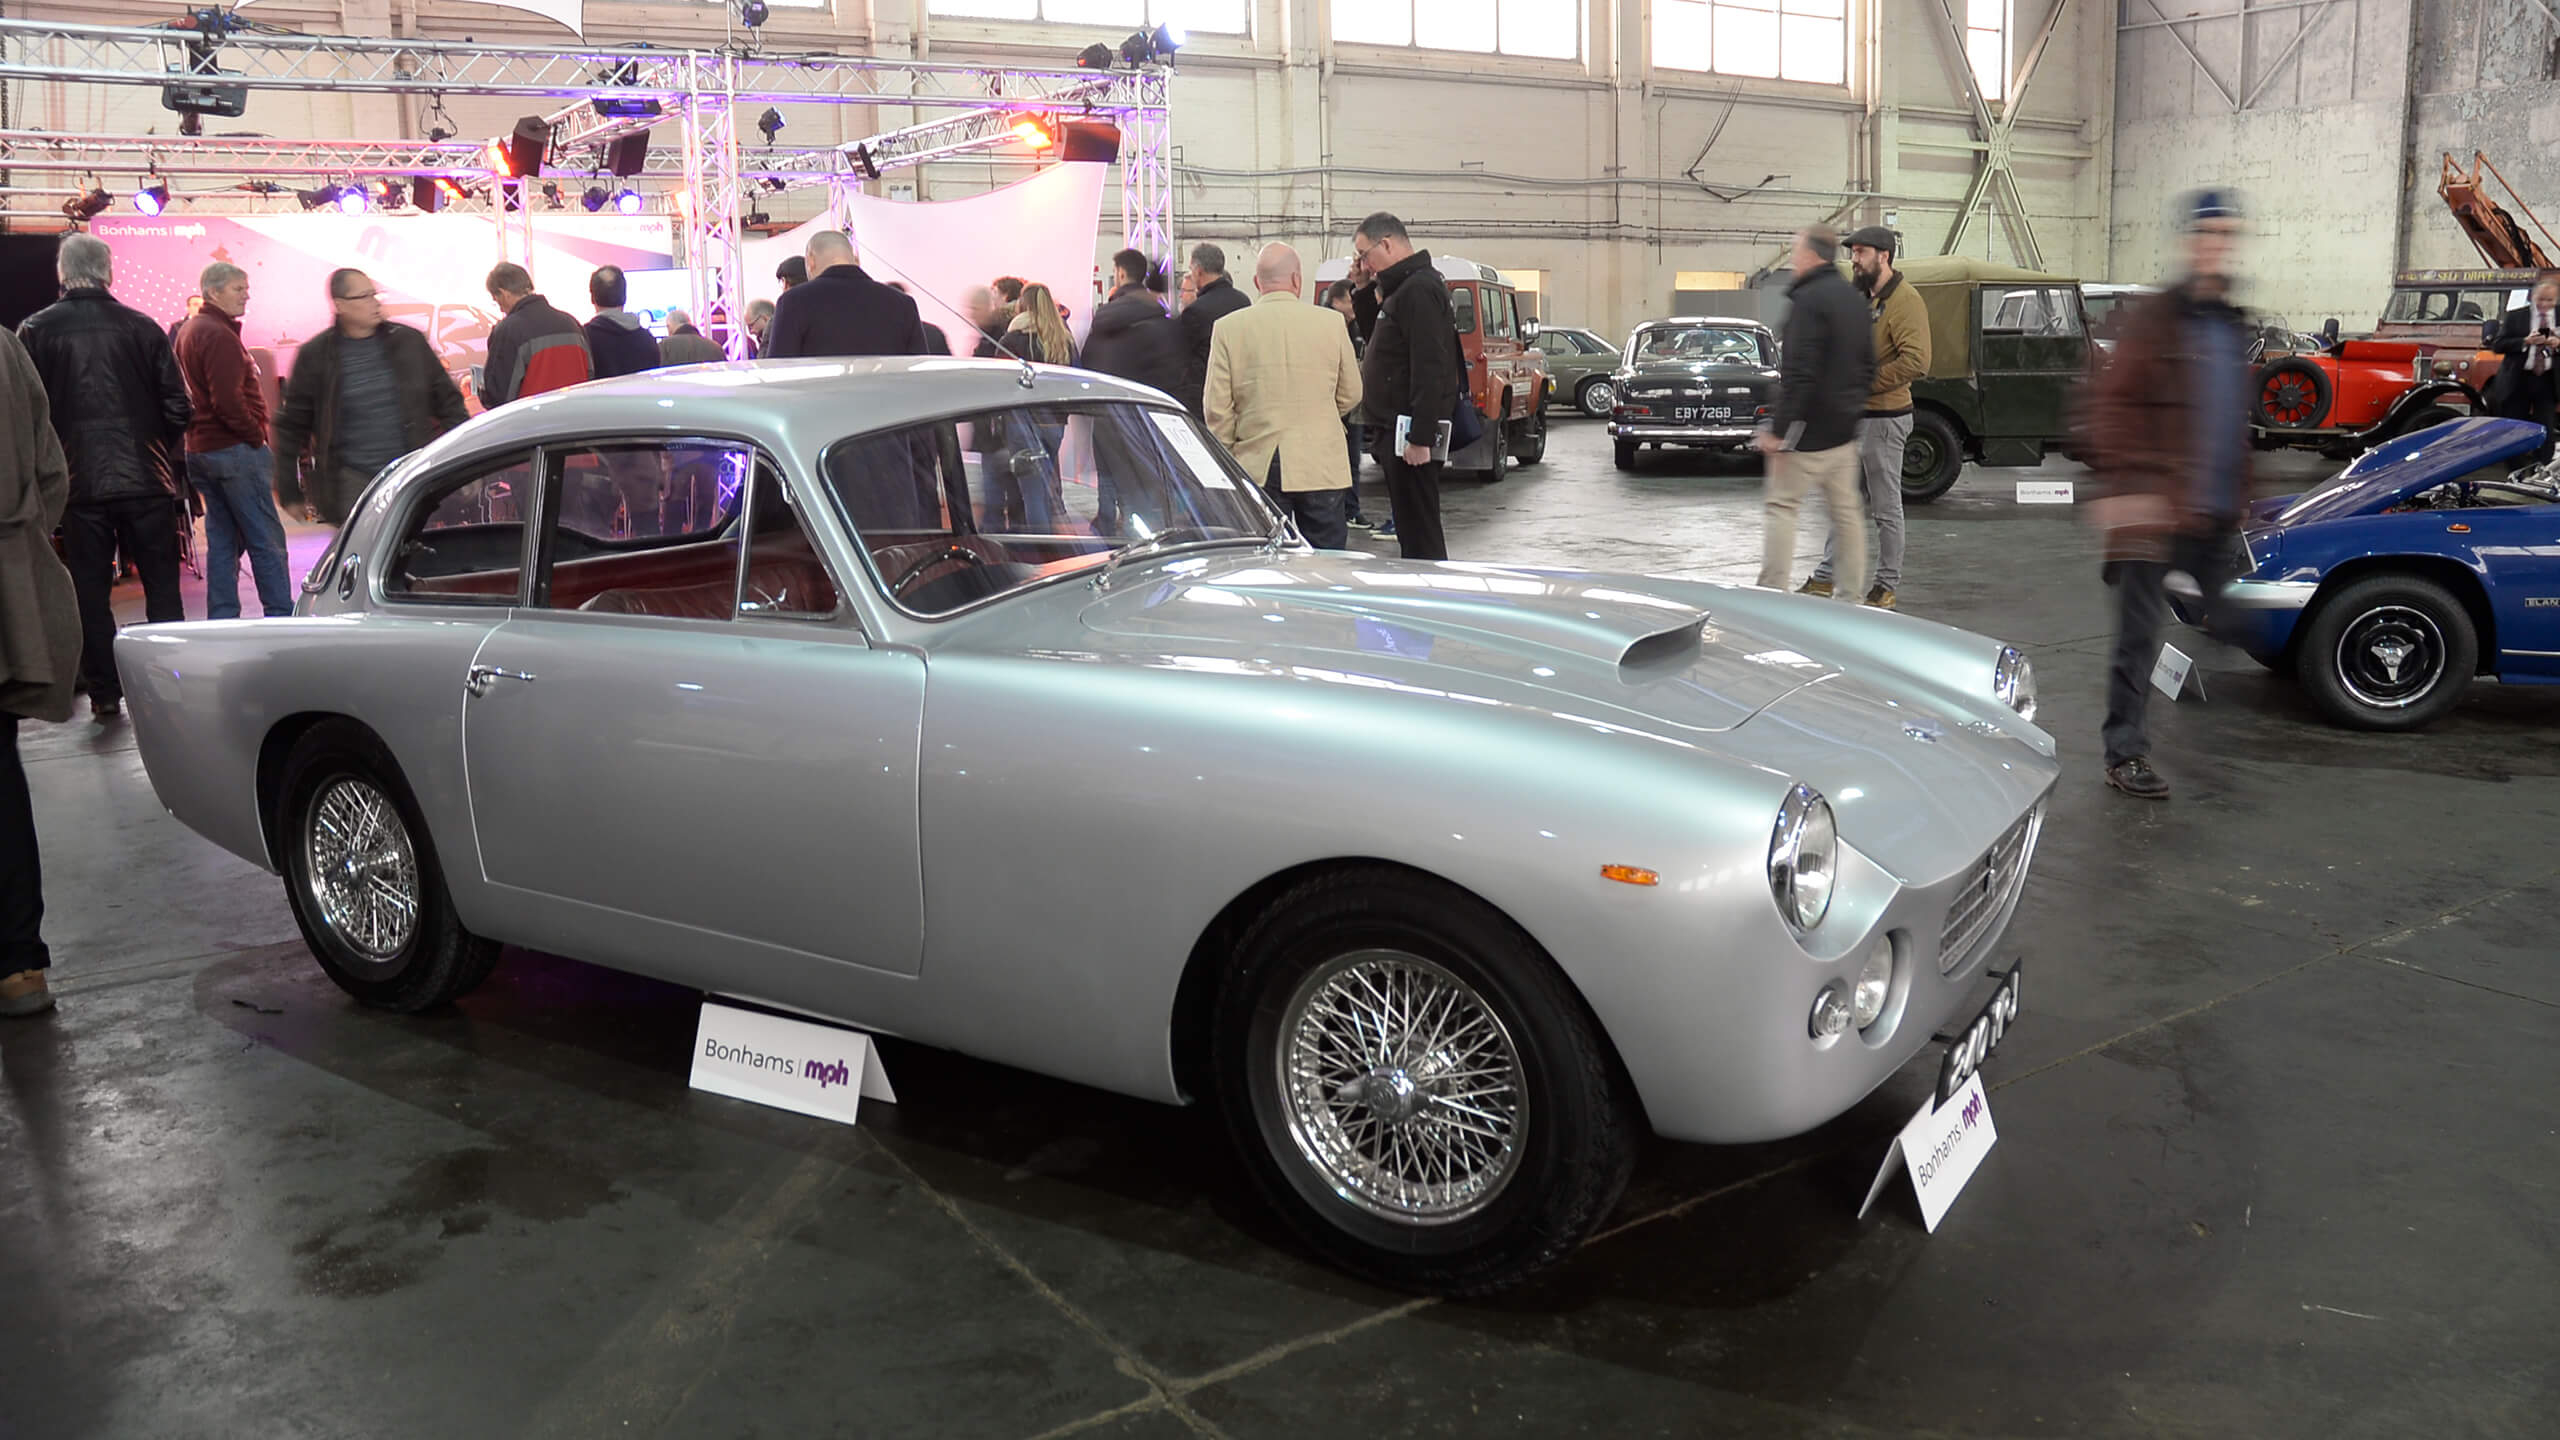 Seconds away, Round Two: Bonhams MPH at Bicester, November 2019